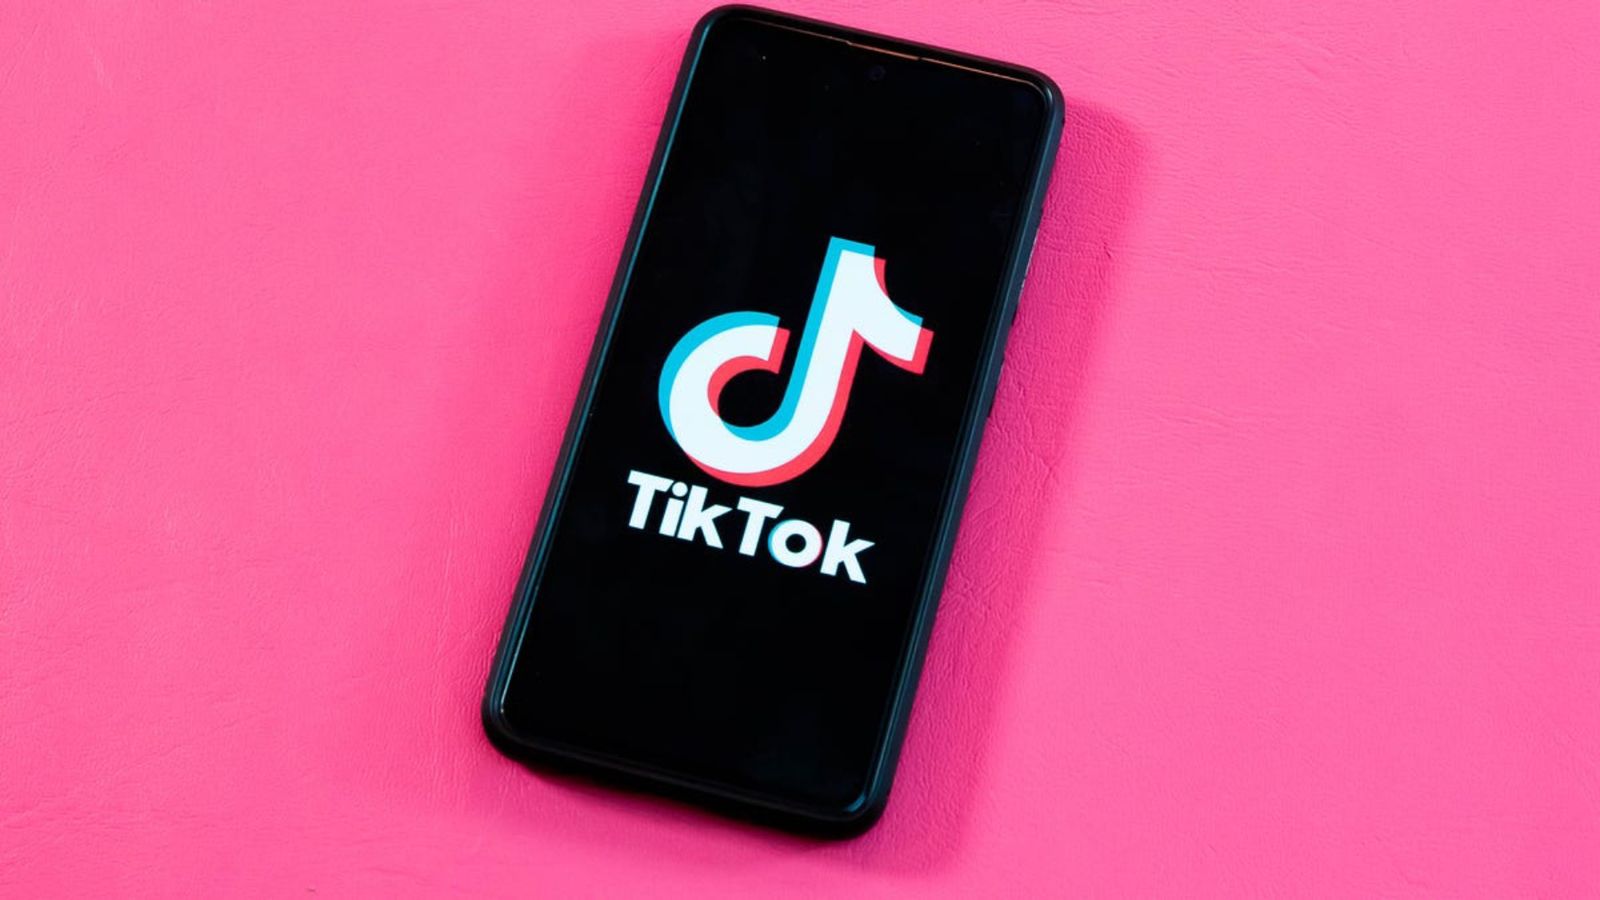 An image of the TikTok "Post is being processed" error on a smartphone